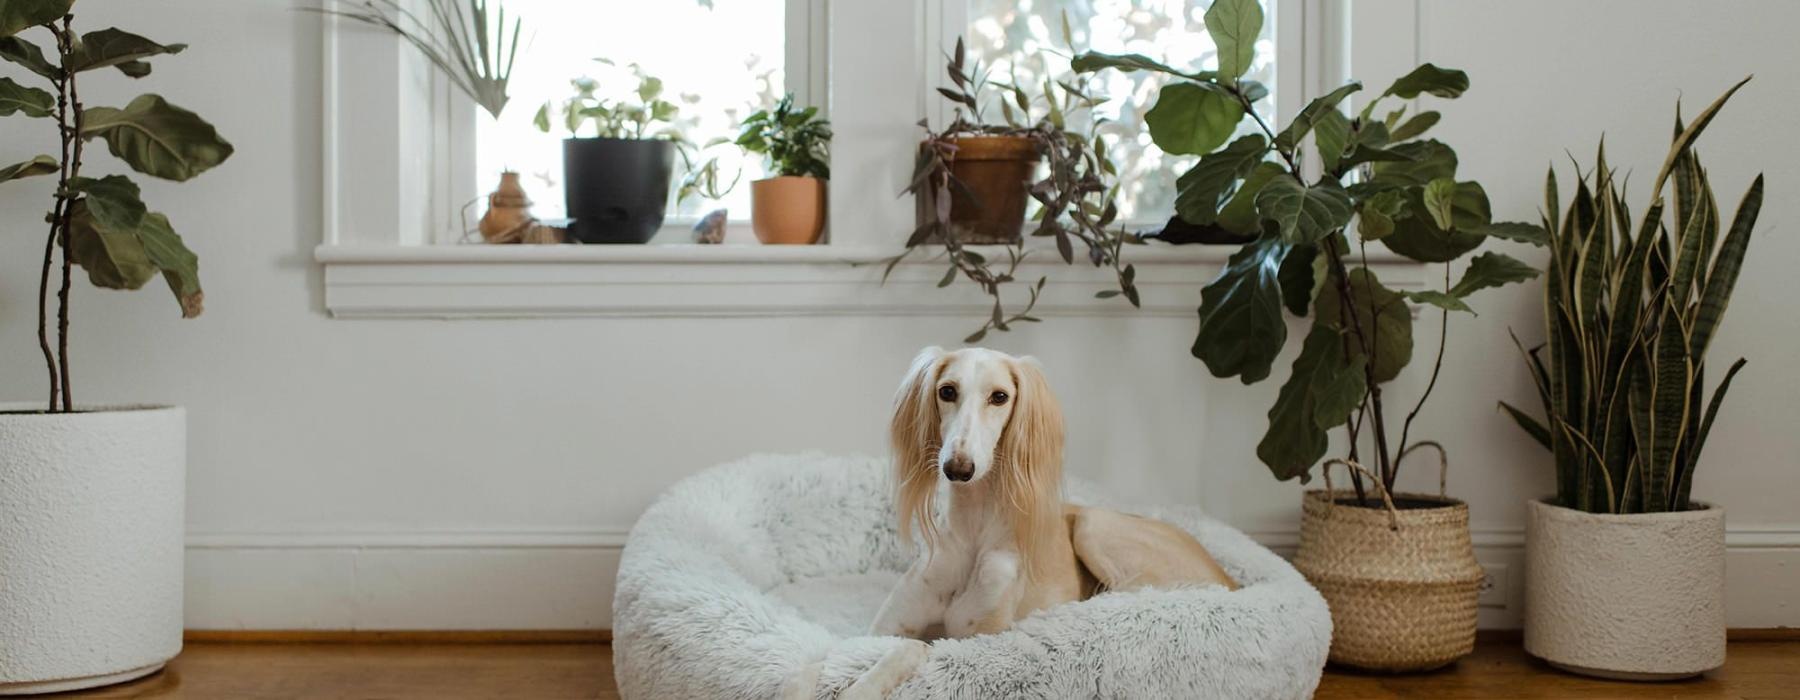 large dog sits in its bed under a windowsill full of potted plants